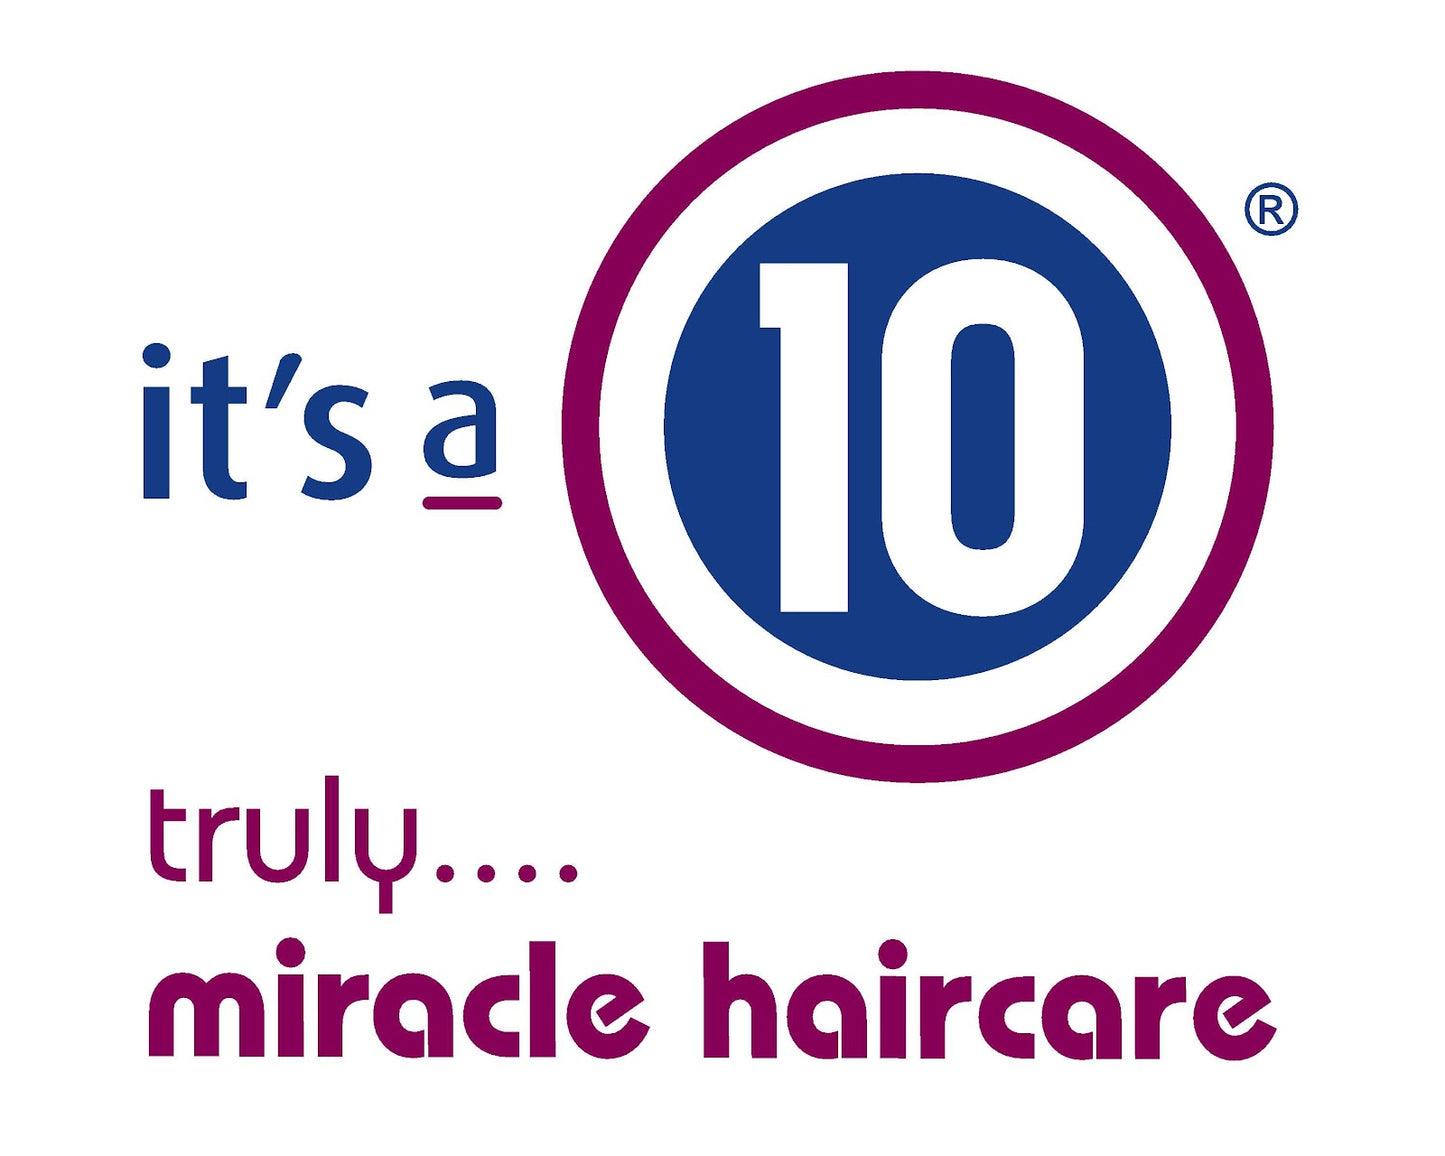 It's a 10 Miracle Blow Dry Glossing Shampoo 10 Oz